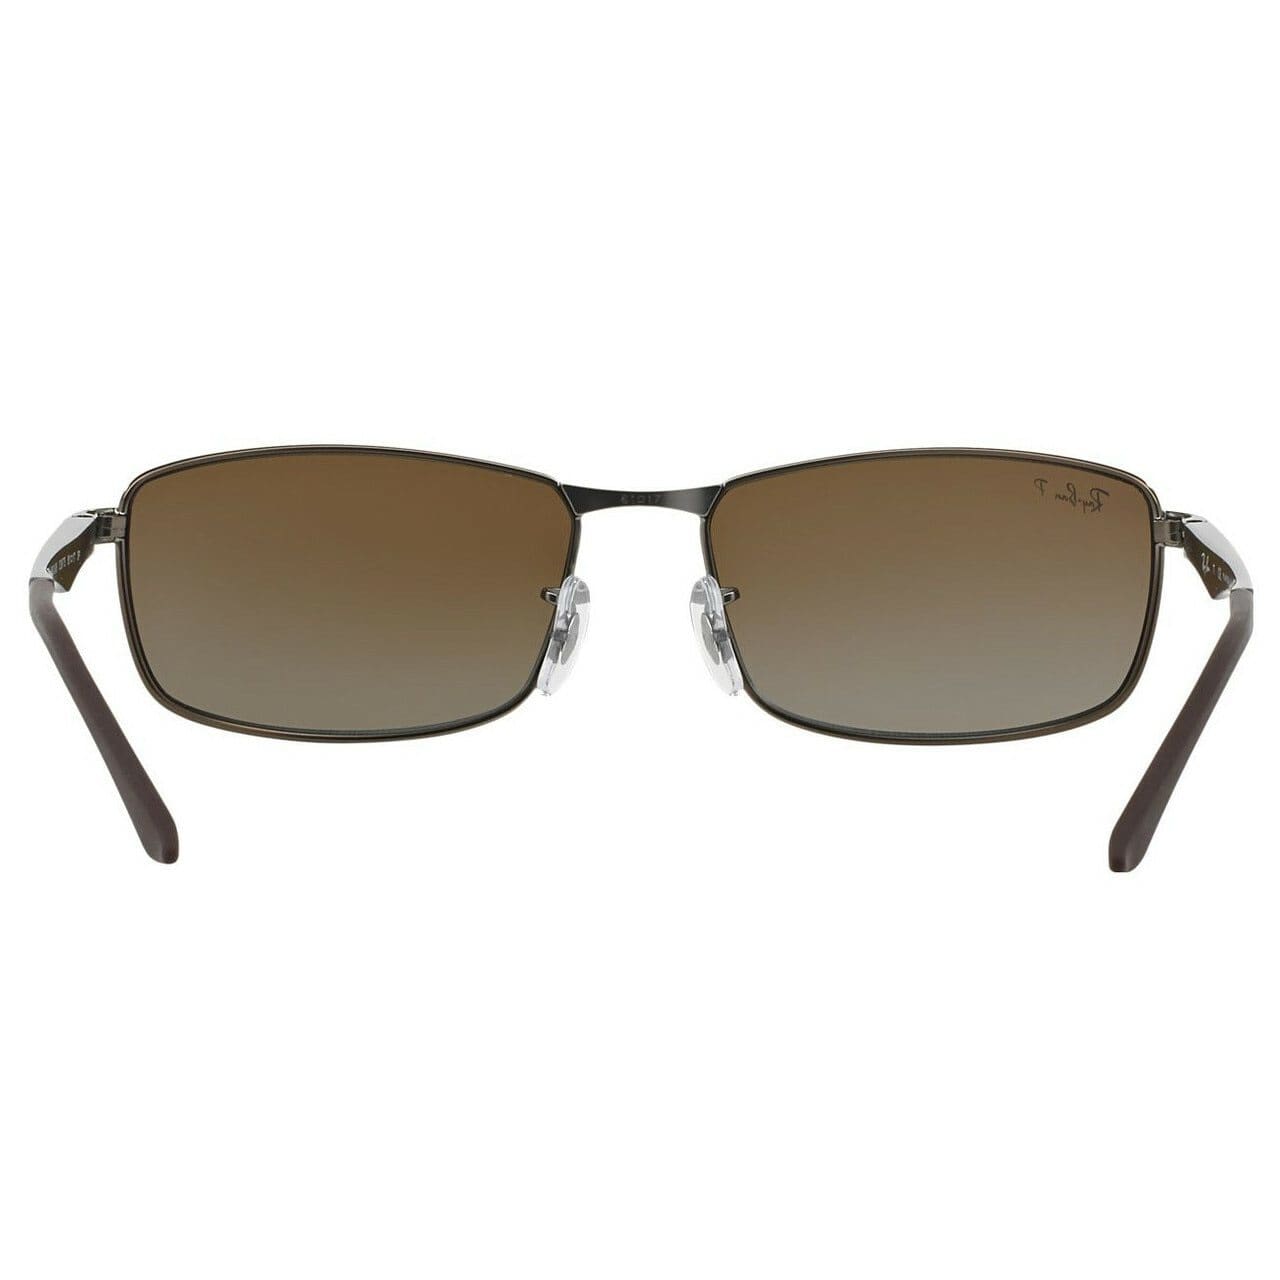 Ray-Ban RB3498 029/T5 Active Lifestyle Sunglasses Gunmetal Frame 61mm Polarized Brown Gradient Lens 8053672303681